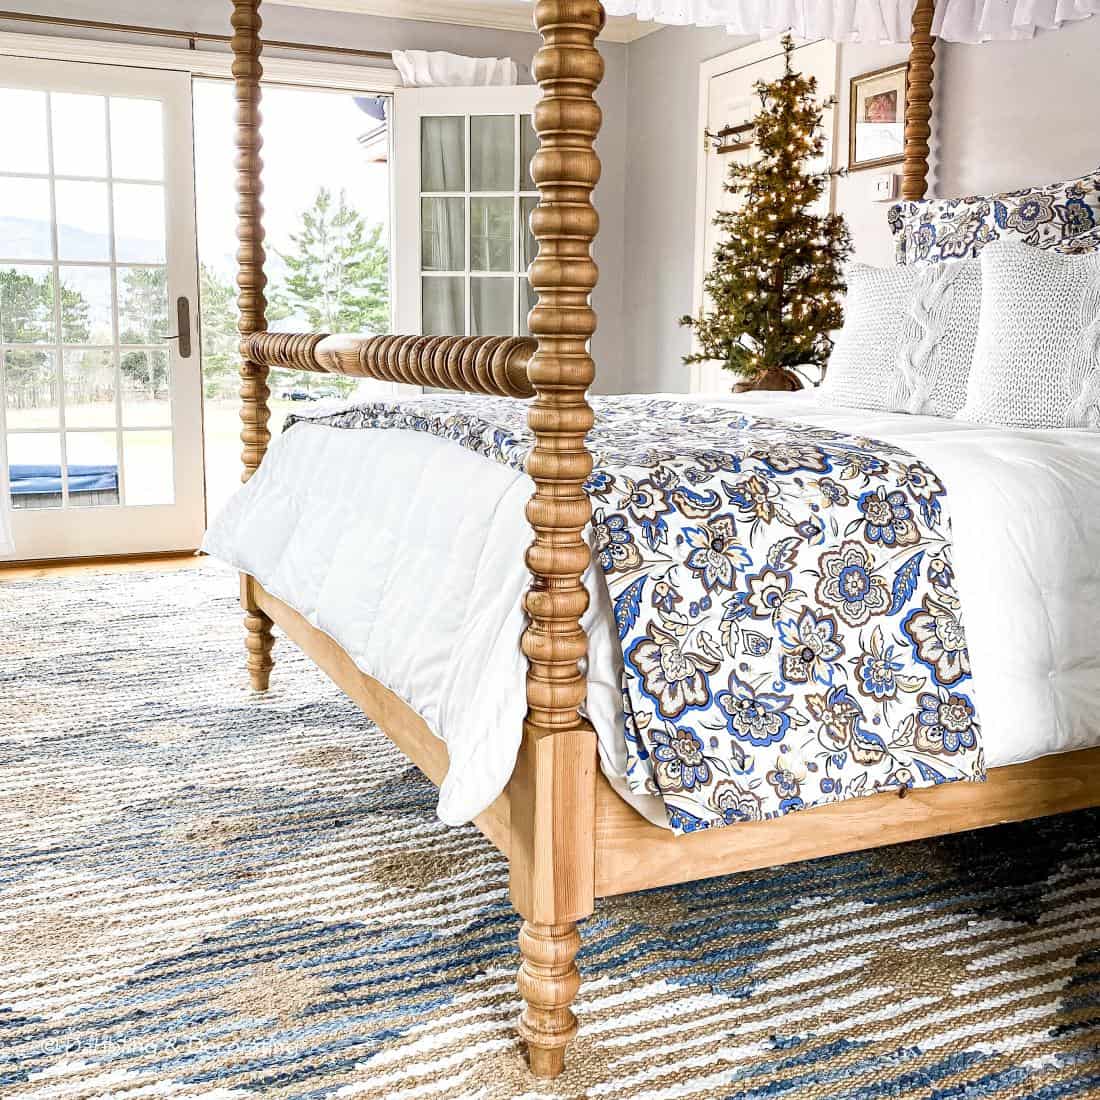 Upgrade Your Bedroom with a Jute Rug